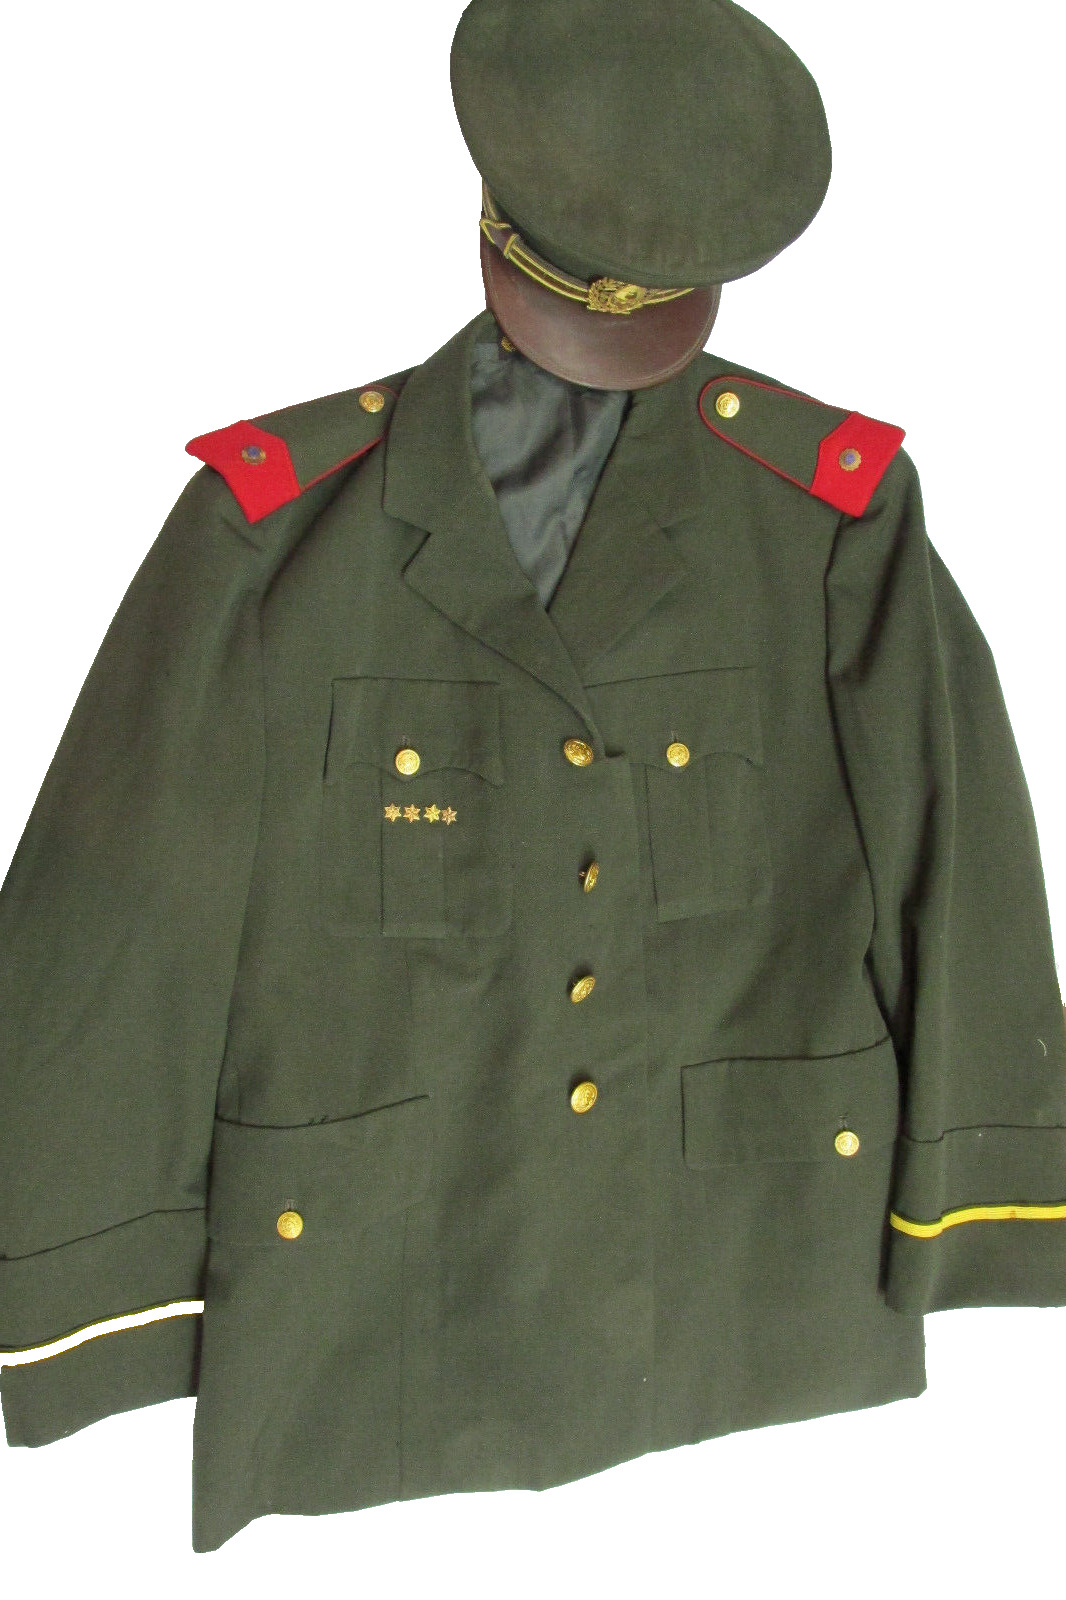 Interesting jacket for an Officer  of the Argentine Army 1960 Cuero